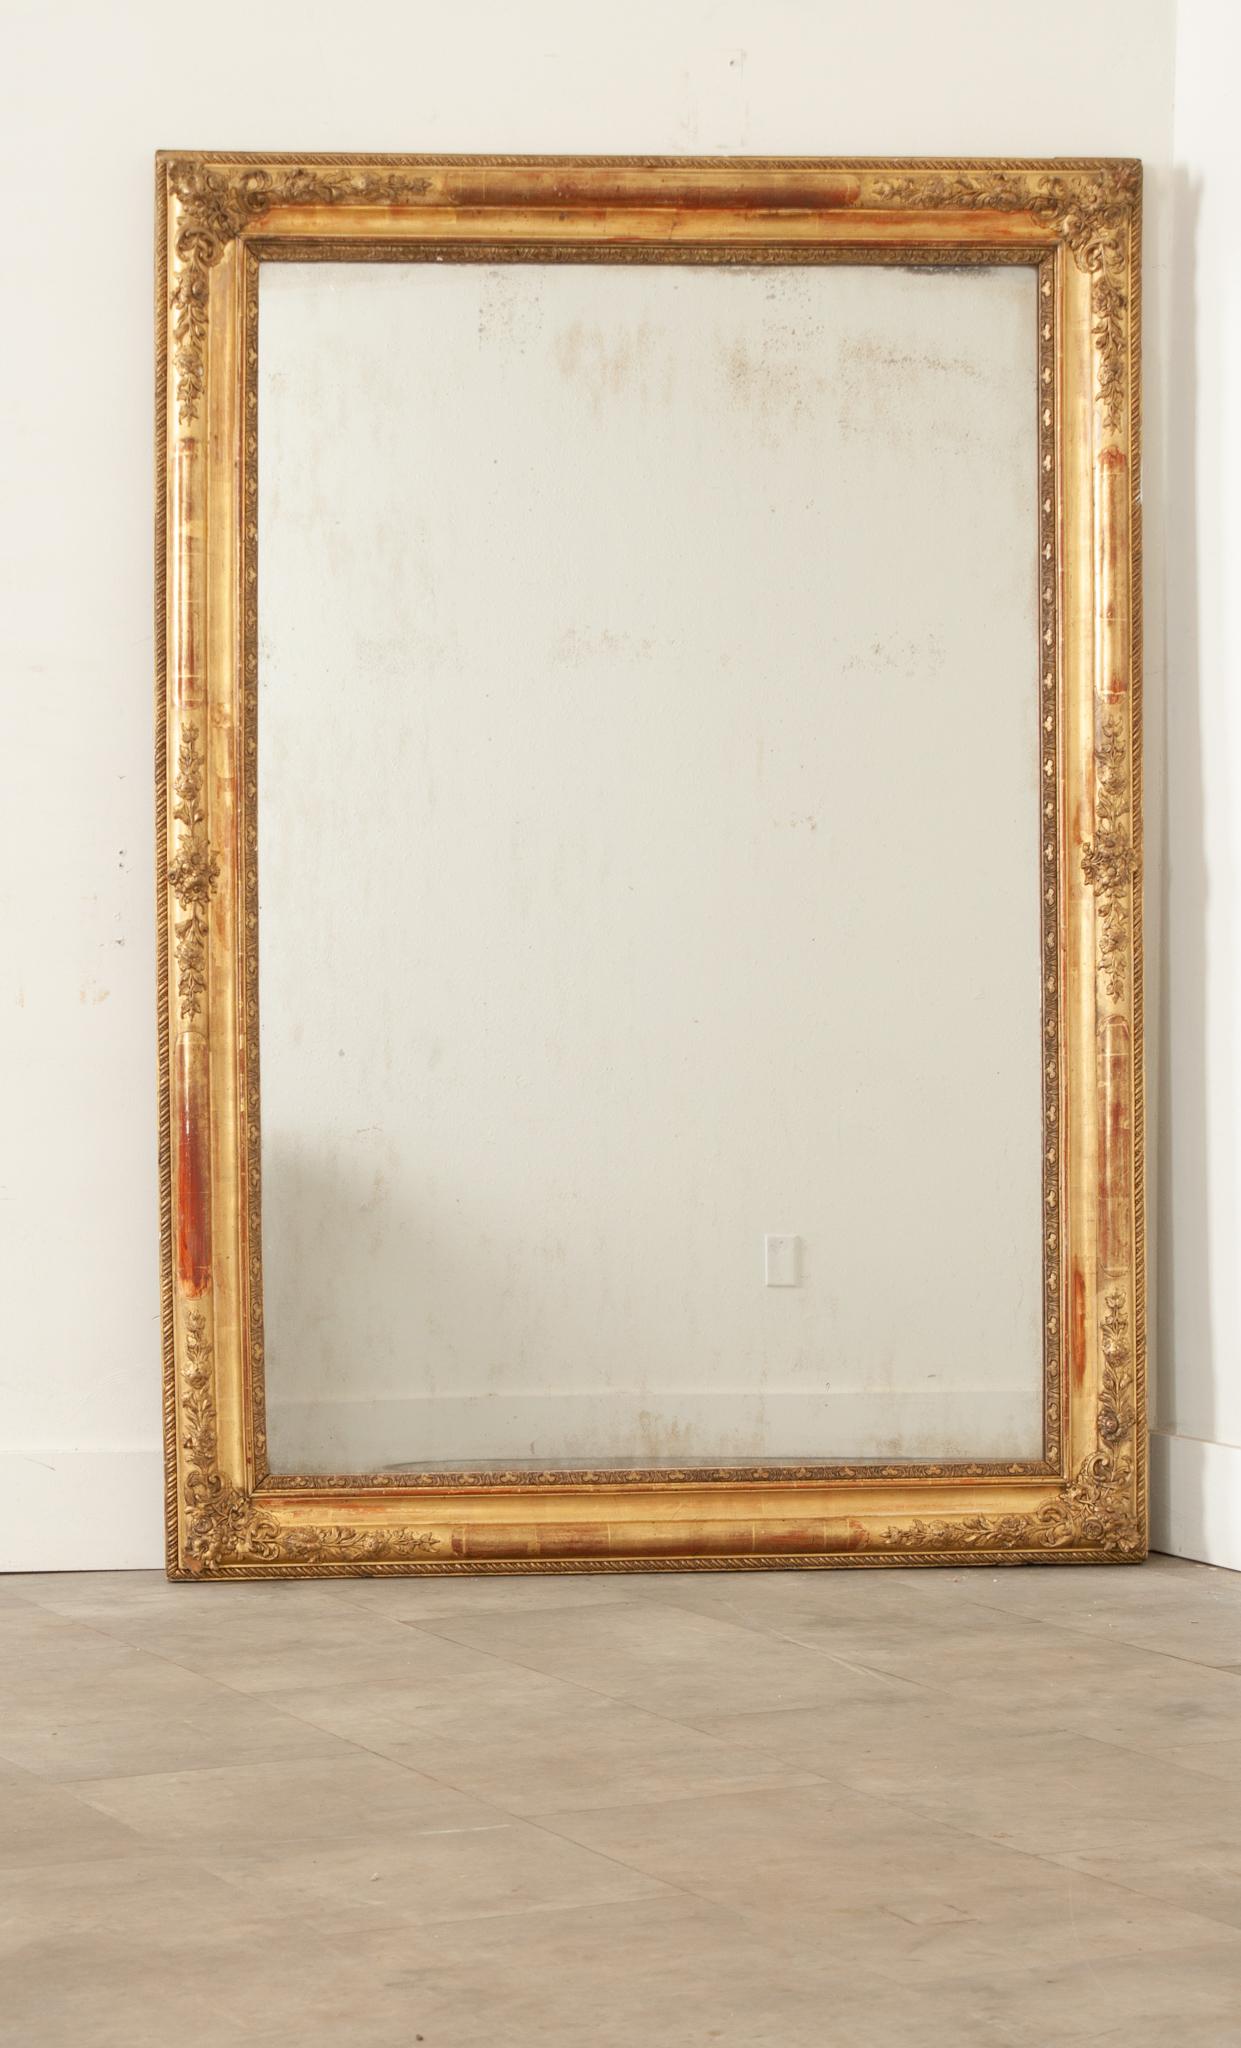 A French 19th century gold gilt framed mirror. The original mirror plate is secured in an intricately carved and molded frame on all four sides with repeating designs and floral accents. Some foxing is visible within the mercury mirror plate, adding